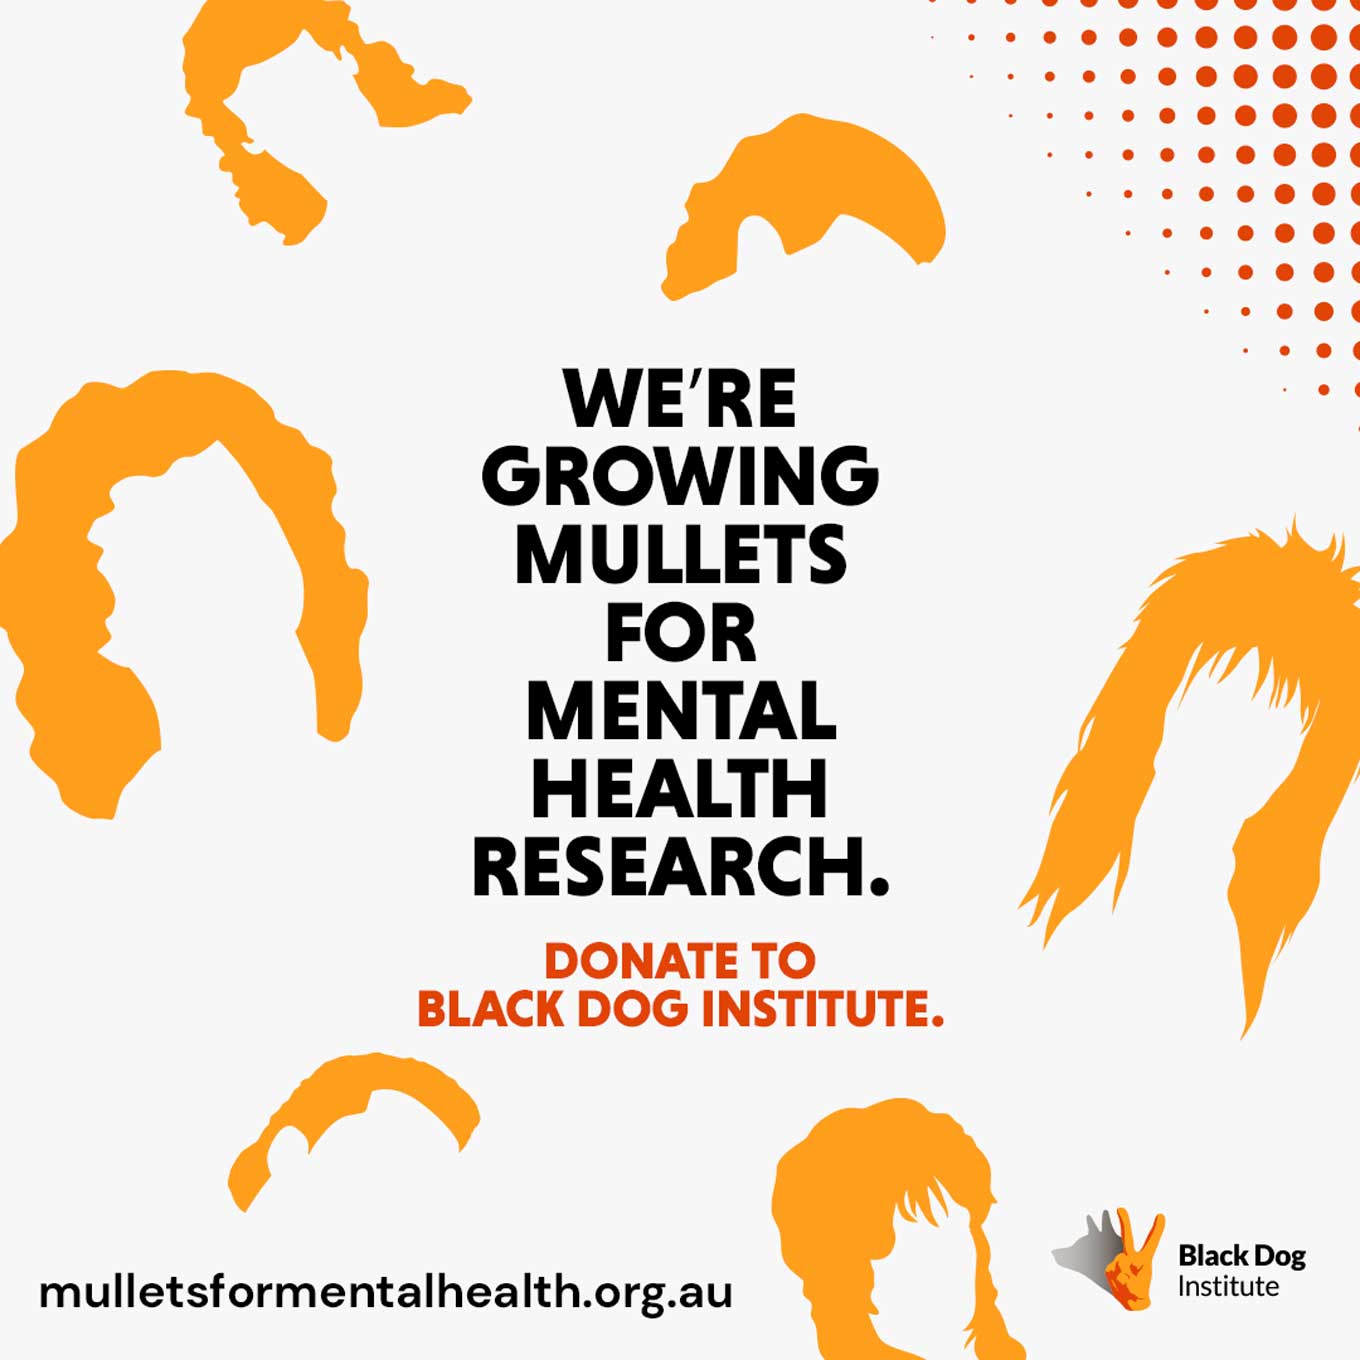 We're growing mullets for mental health research. Donate to Black Dog Institute.